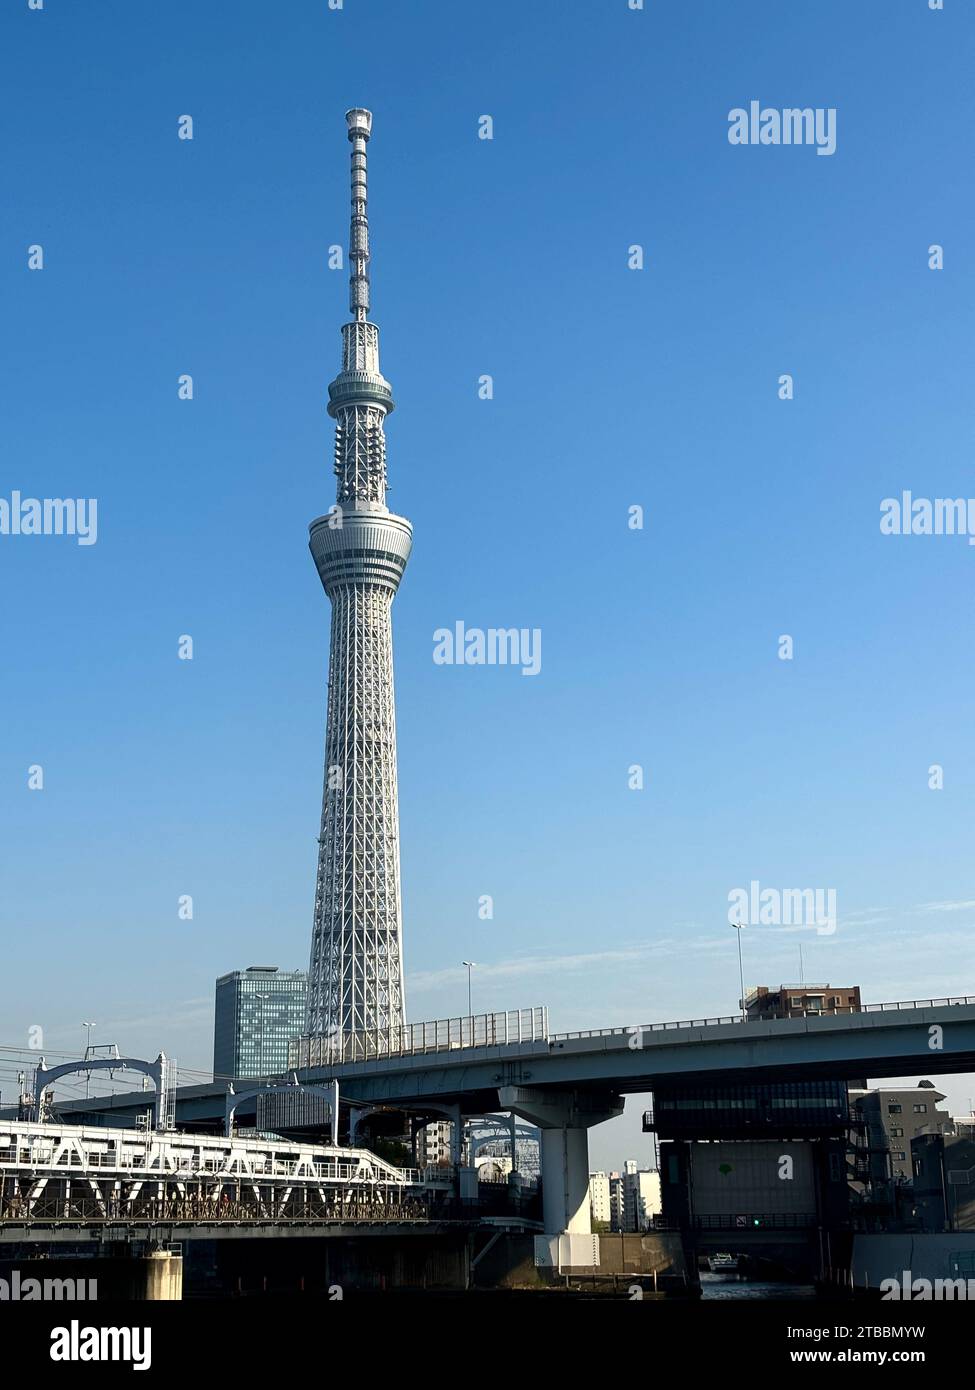 Completed in 2012, the Tokyo Skytree is located in the Sumida ward of Tokyo, Japan and is one of the tallest structures in the world. Stock Photo